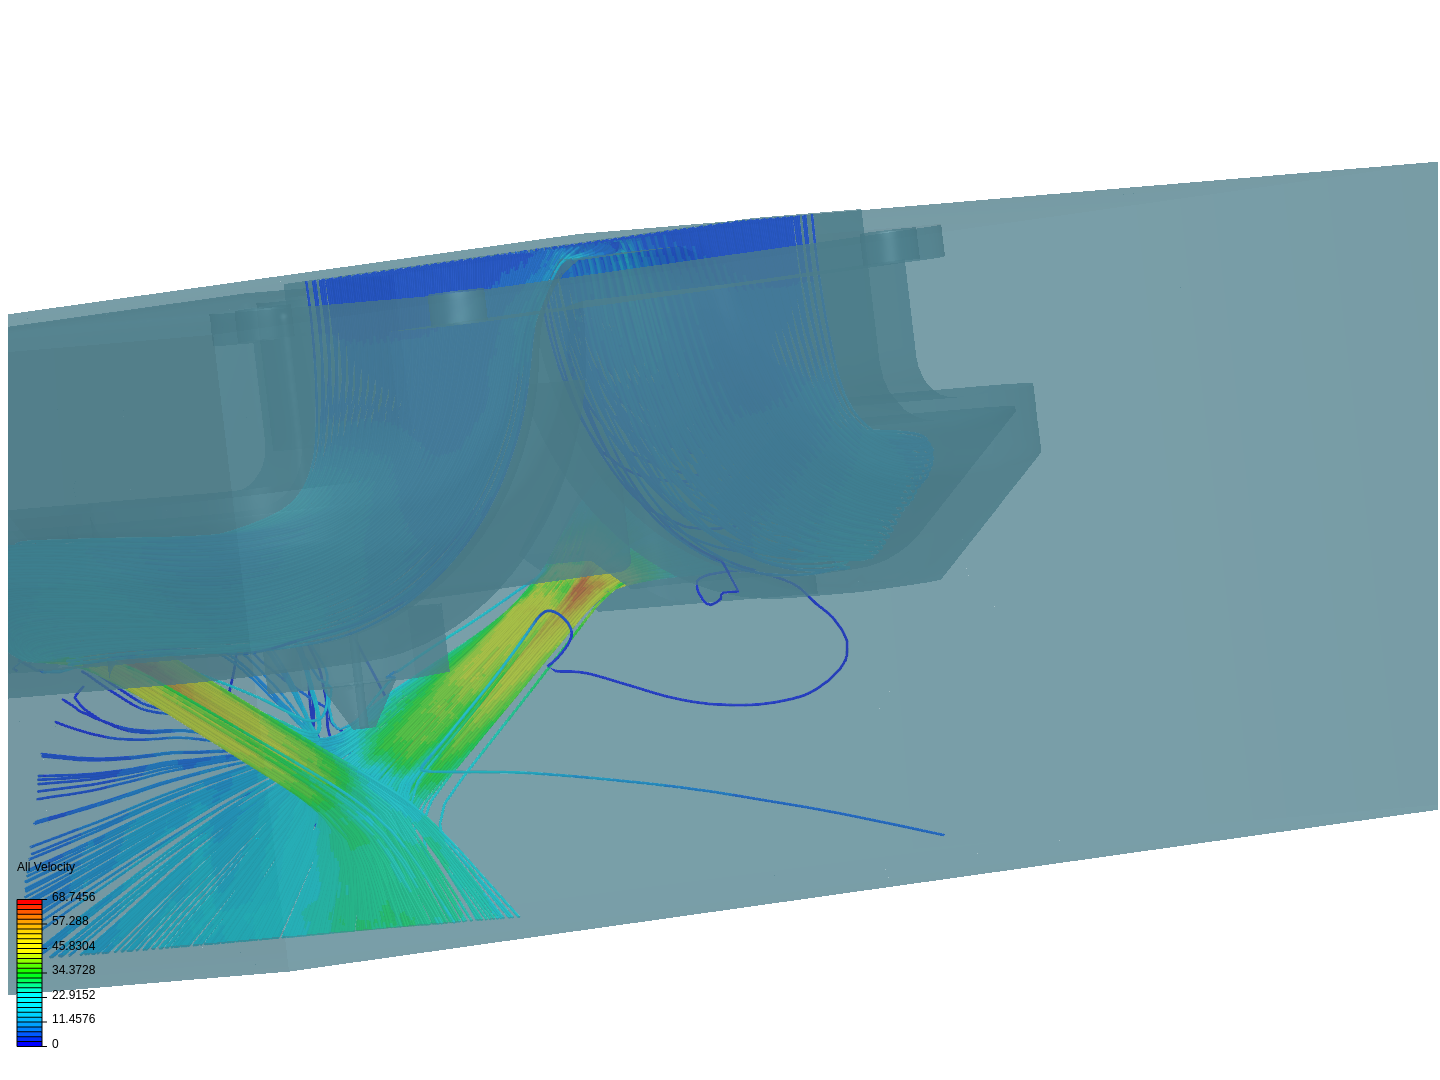 Fan duct CFD V2 image